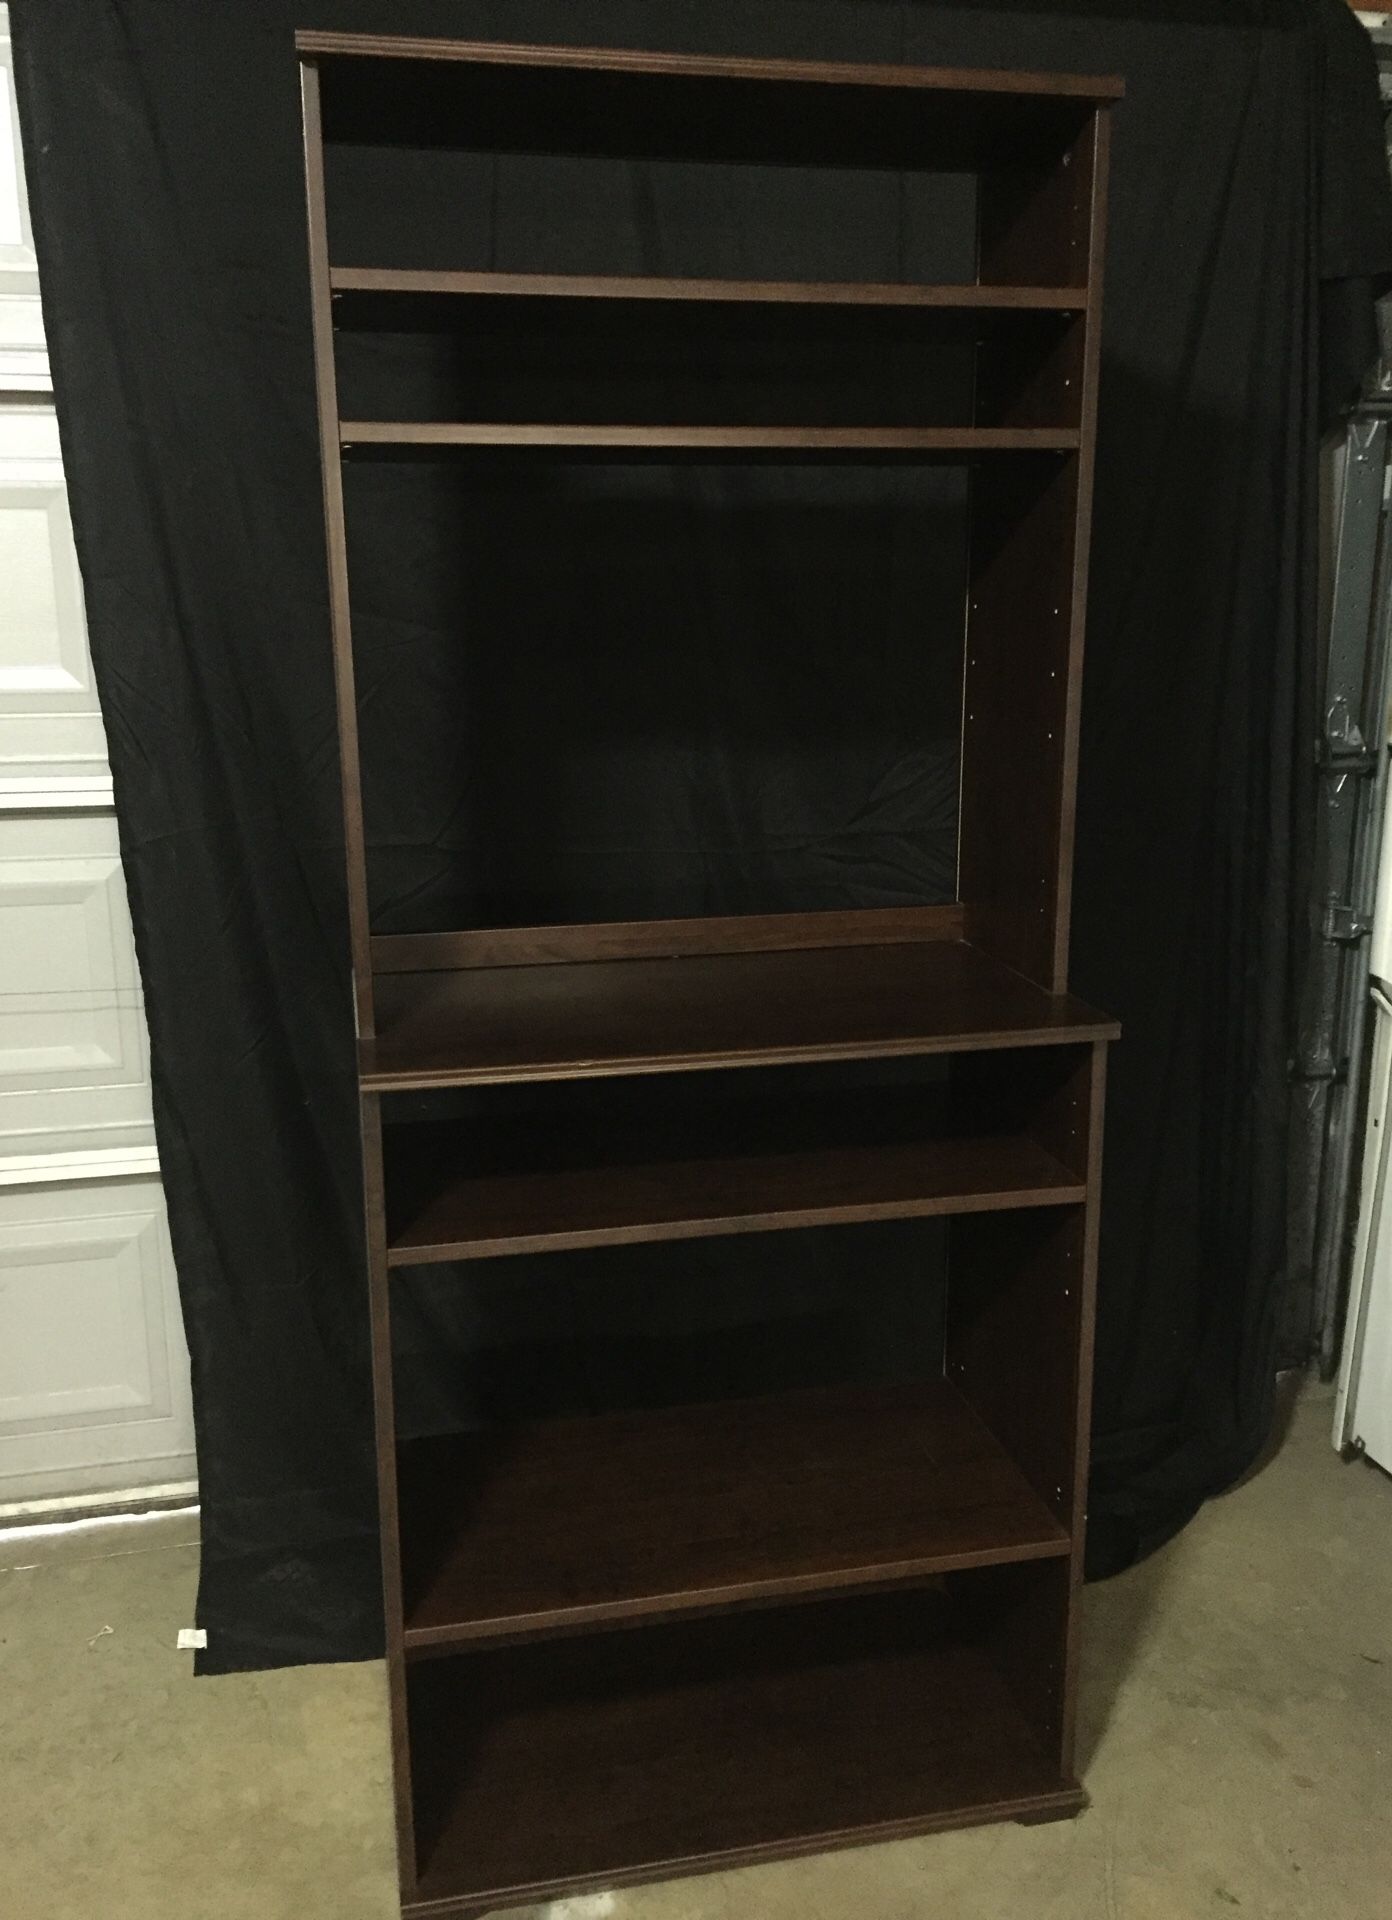 Shelving unit / TV stand. 72 height 30 wide and 16 deep. 4 removable / adjustable shelves.